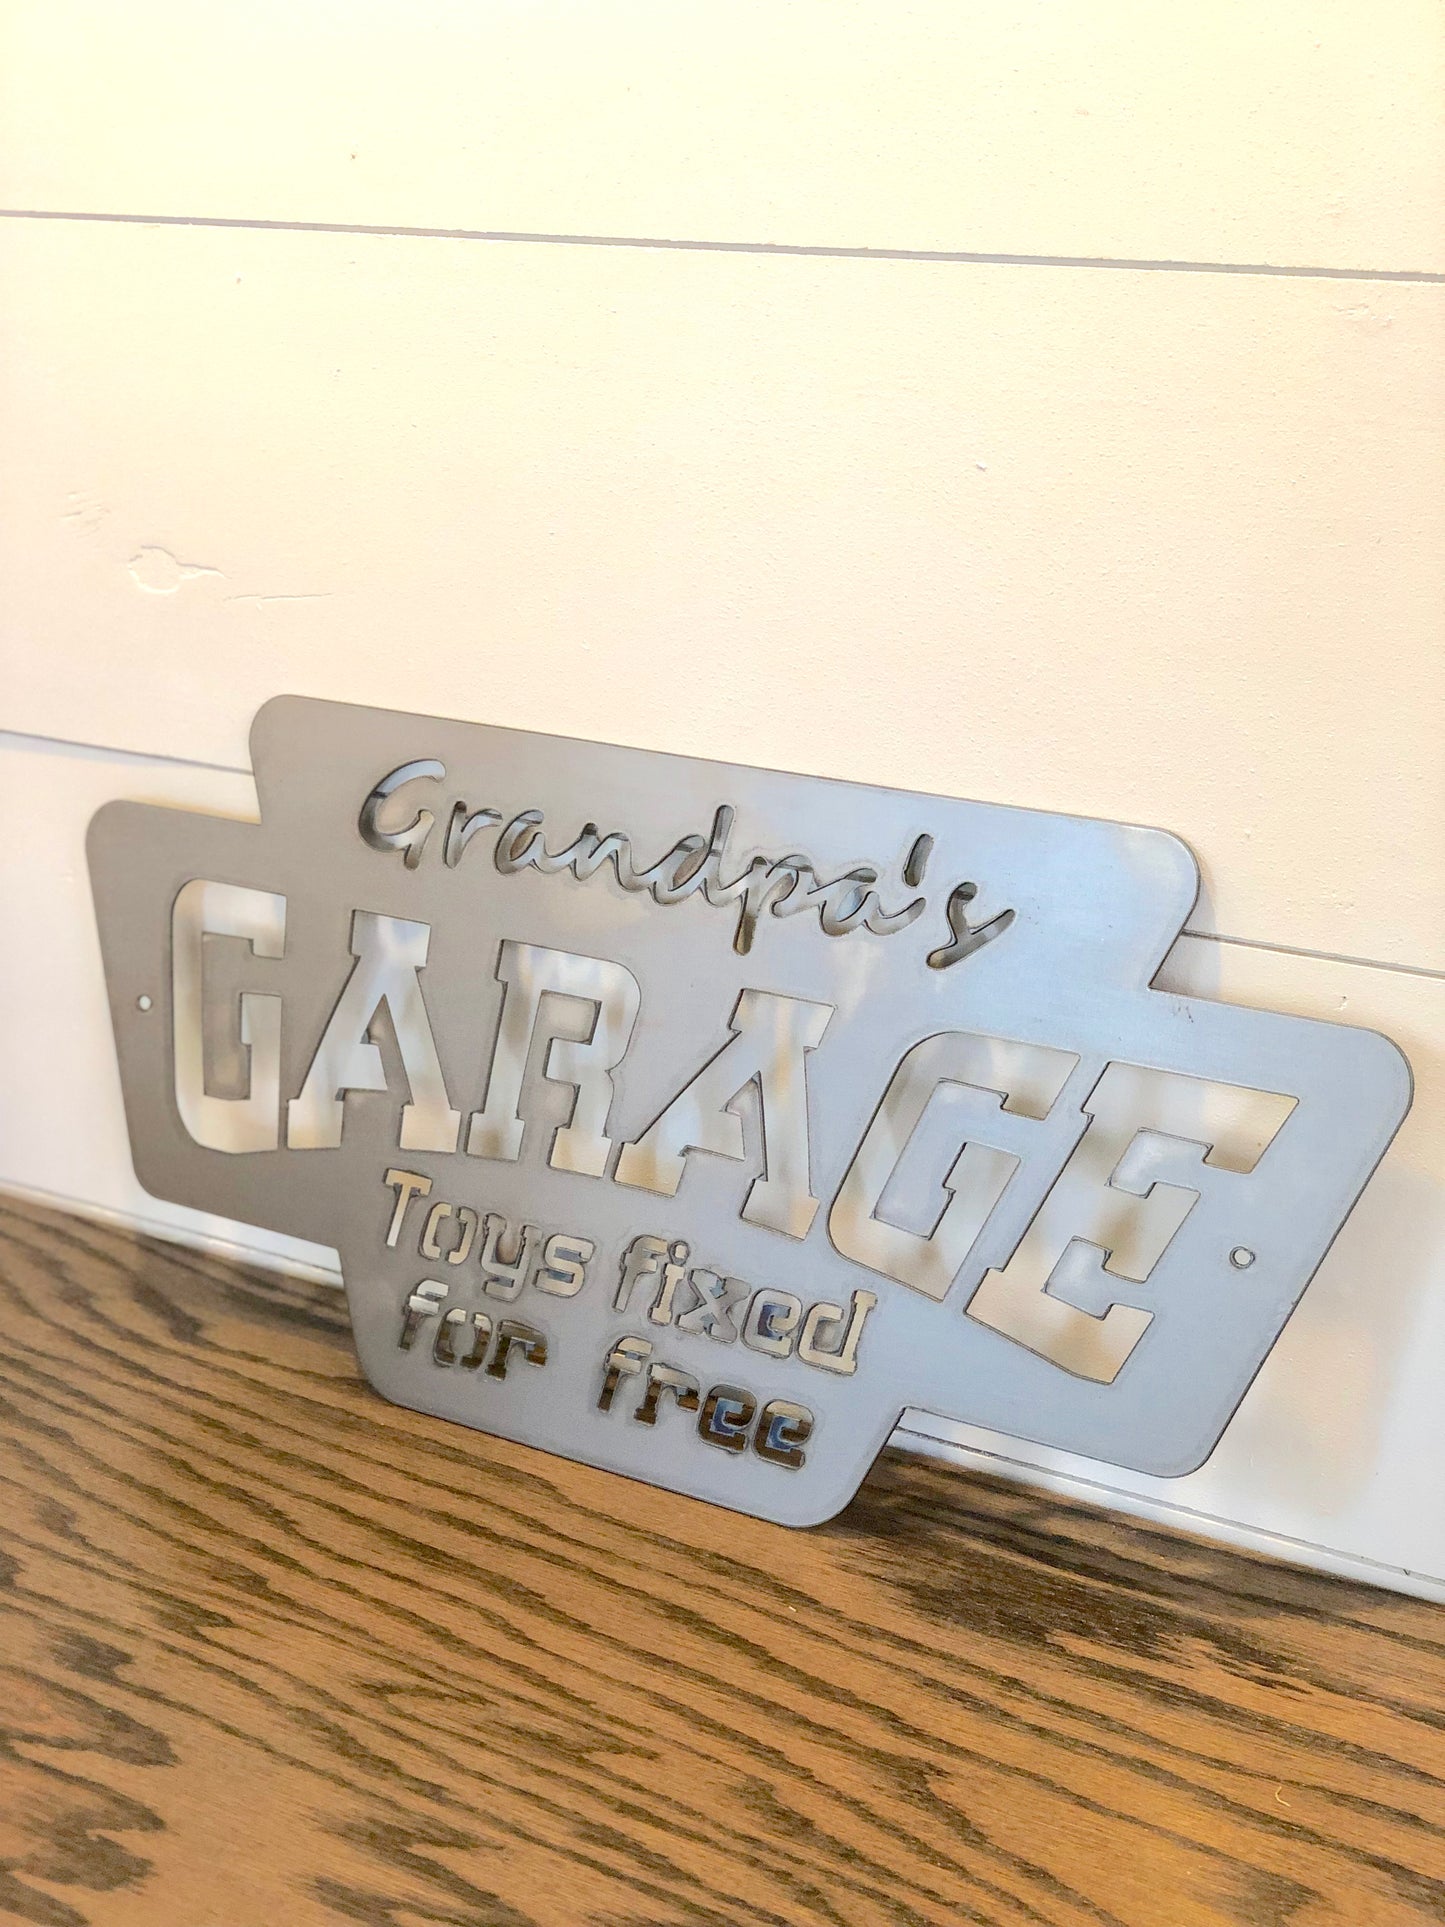 Grandpa's Garage - Toys fixed for free Metal Wall Hanging